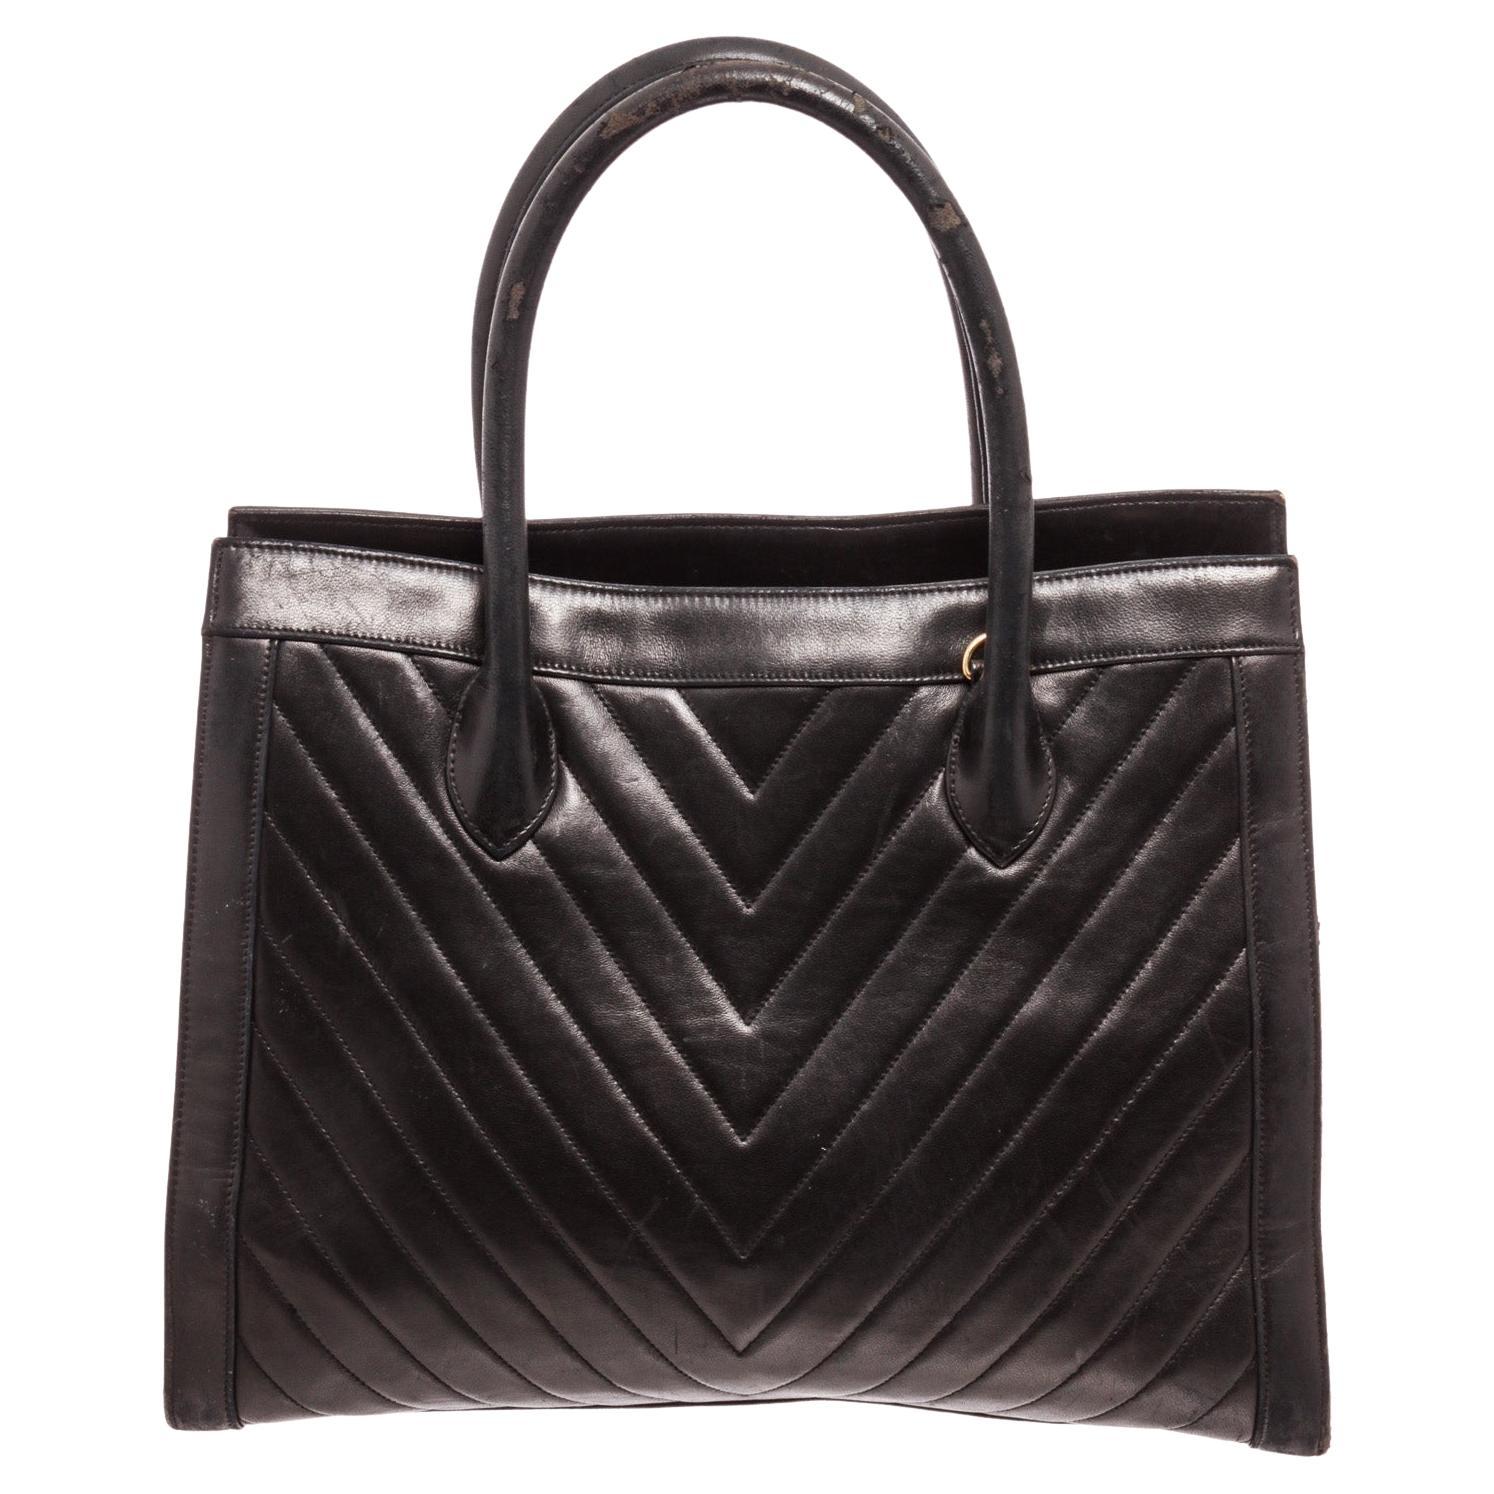 Chanel Black Leather Double Handle Tote Bag For Sale